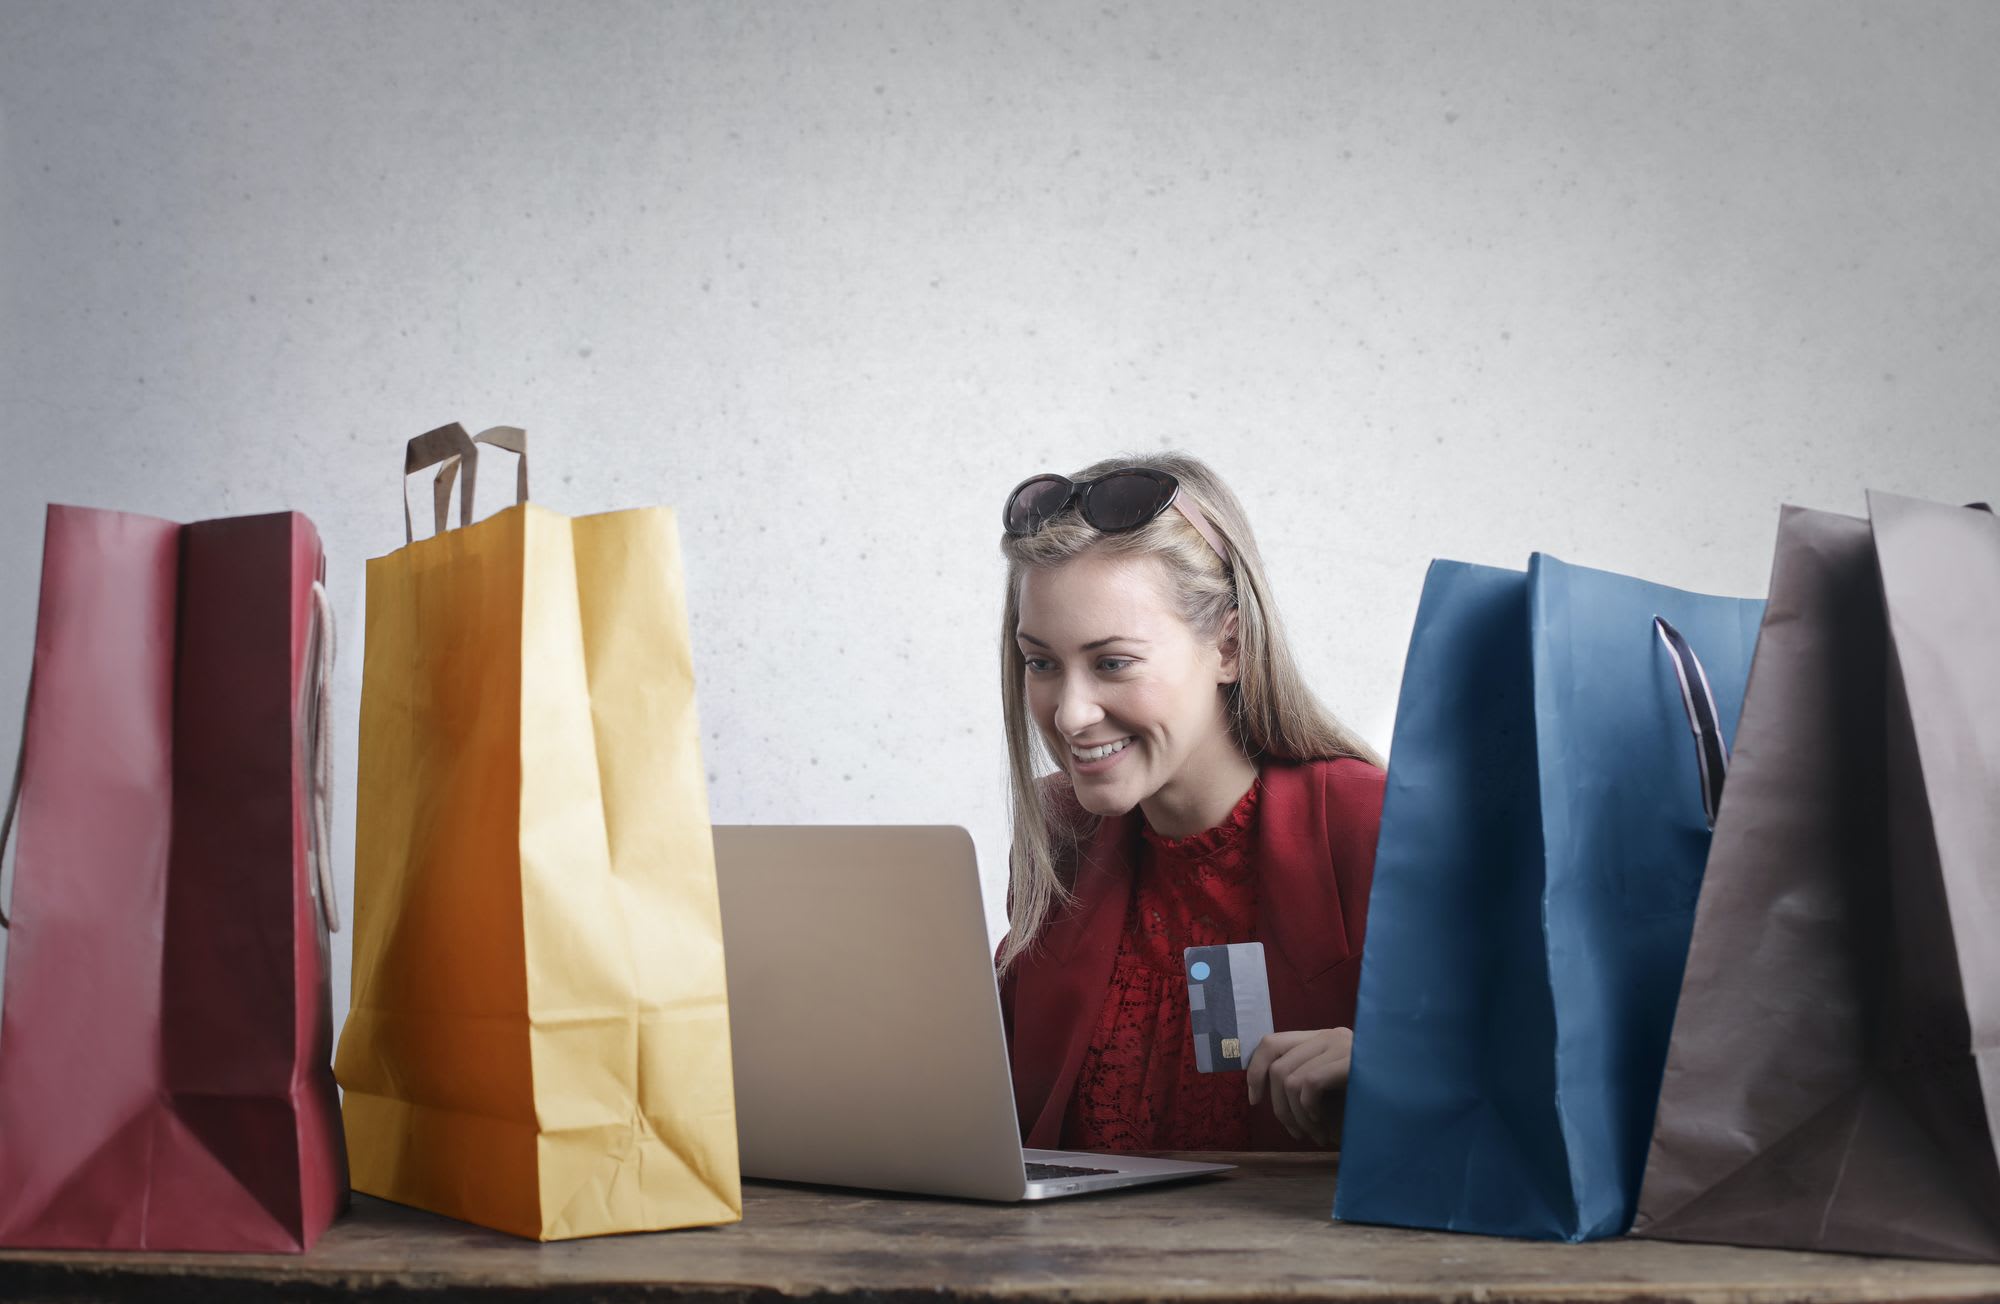 A lady smiling using a laptop to shop. The image represents a user friendly site without needing an ecommerce developer